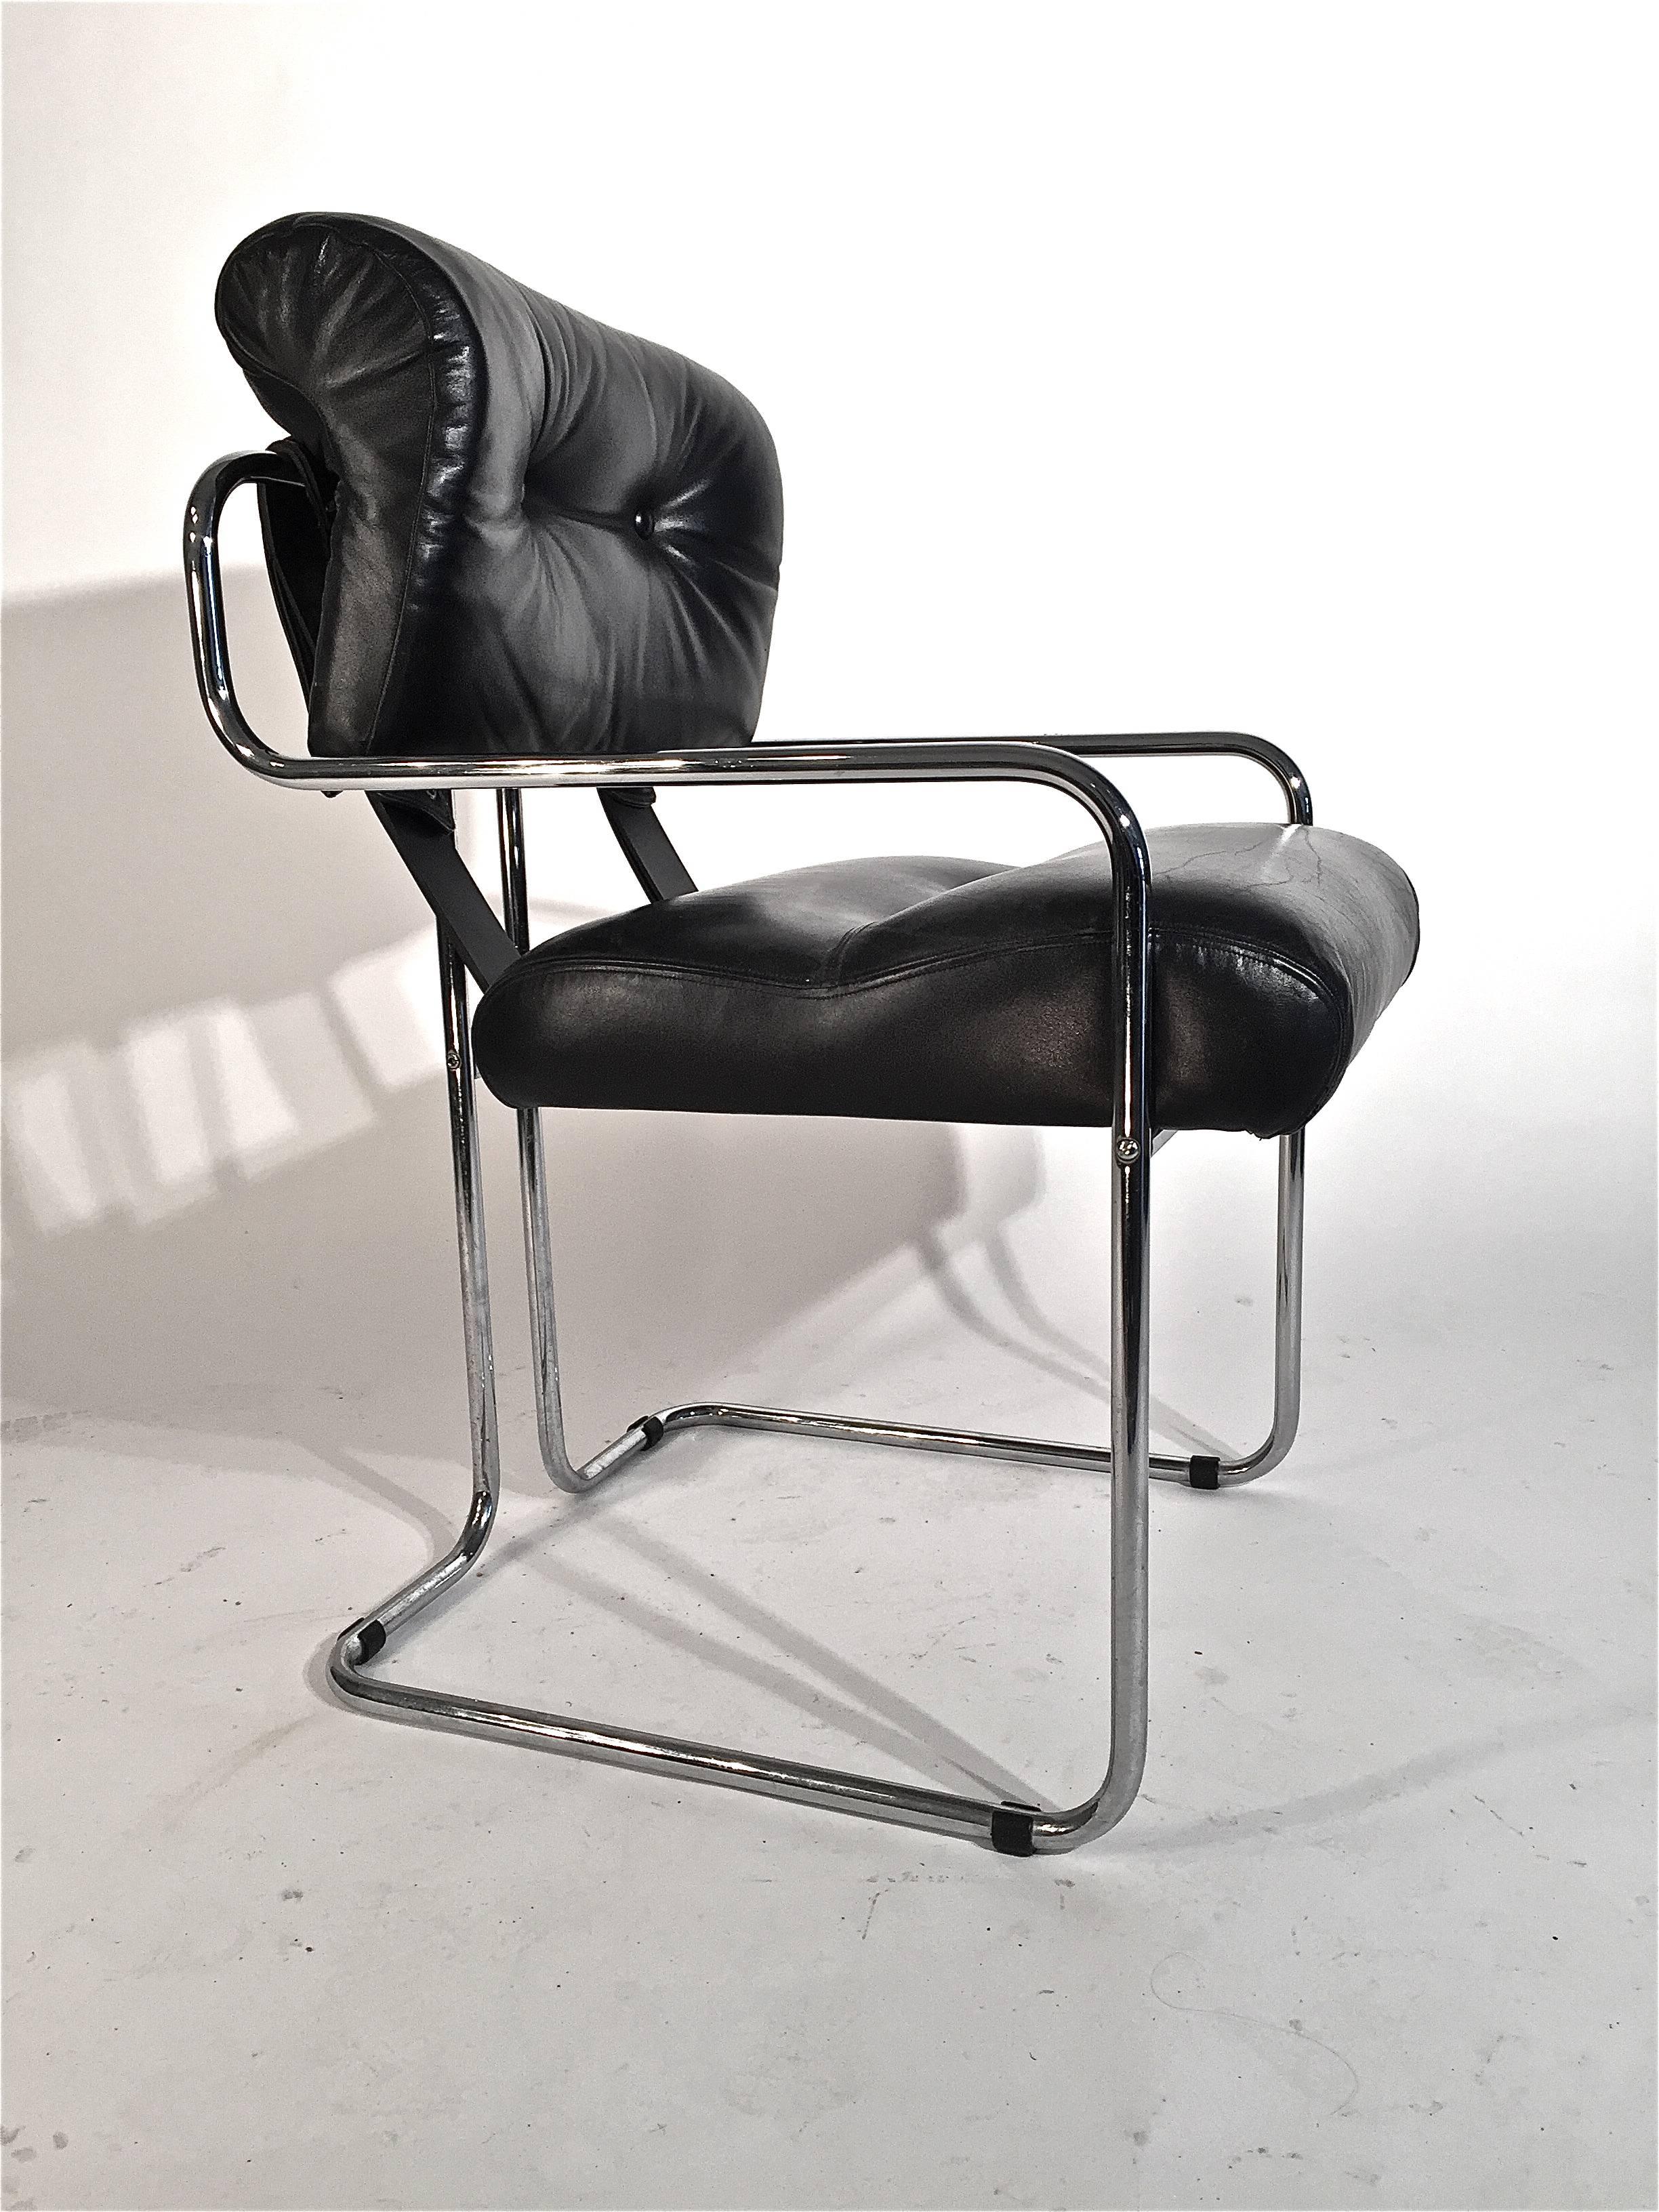 Guido Faleschini tucroma chairs by i4 Mariani for Pace. The leather is black in color. Chairs are priced individually. There are two available.